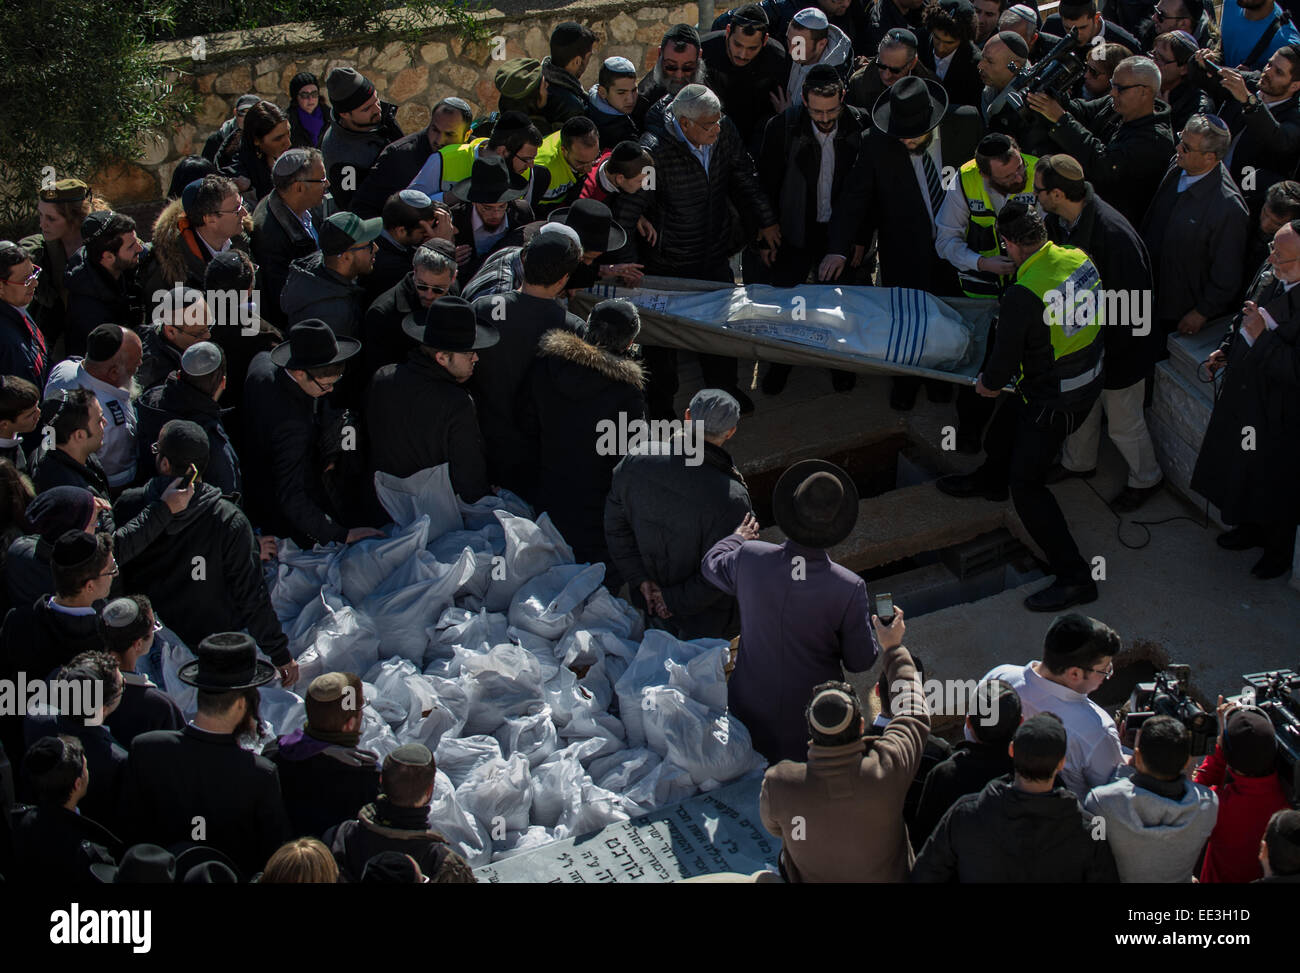 Jeruslaem, Israel. 13th Jan, 2015. A body of victim of Paris supermarket attack is carried to the grave during a funeral ceremony at Givat Shaul cemetery, on the outskirts of Jerusalem, on Jan. 13, 2015. Israeli leaders and multitude of mourners gathered Tuesday with the families of four Jewish victims of last week's terror attack on a Paris kosher supermarket for a solemn funeral ceremony at a Jerusalem cemetery. Yoav Hattab, Yohan Cohen, Philippe Braham and Francois-Michel Saada, were gunned down on Friday during a hostage attack in Paris.market in eastern Paris. Credit:  Xinhua/Alamy Live N Stock Photo